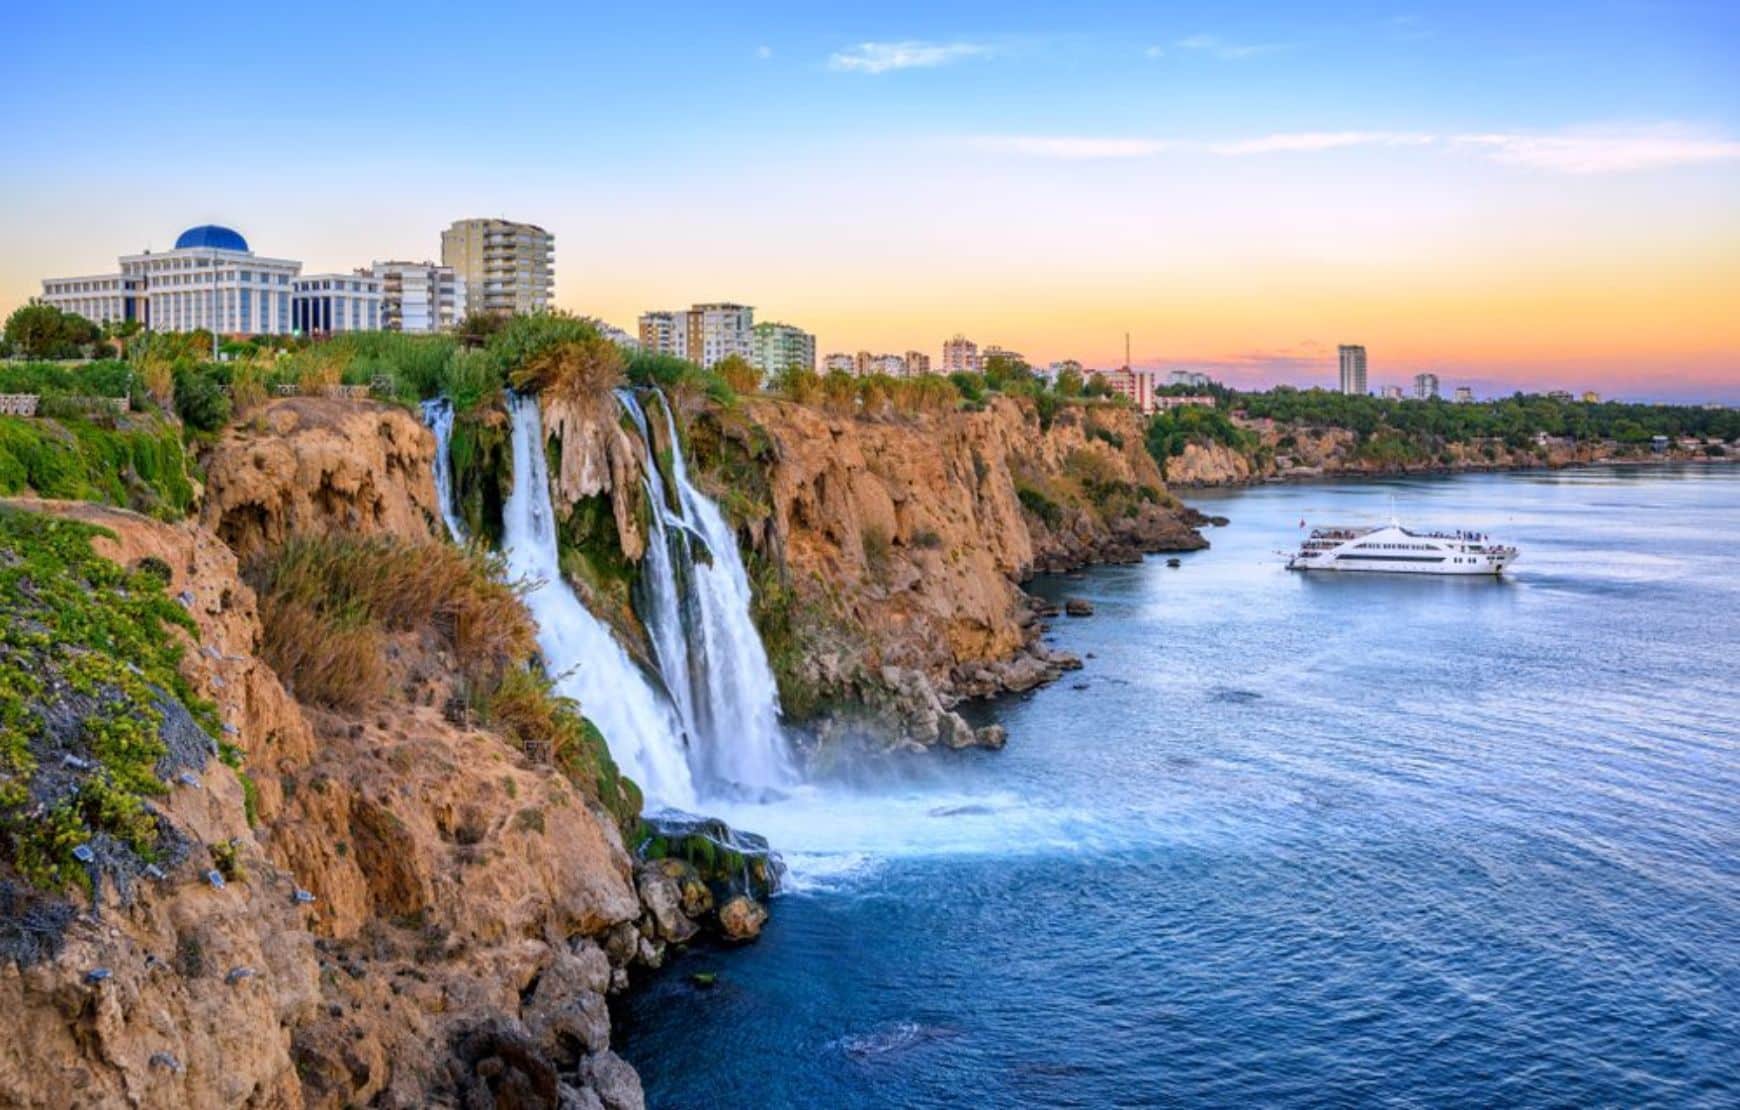 Visit Duden Waterfalls in Antalya with our Four Cities in One Tour